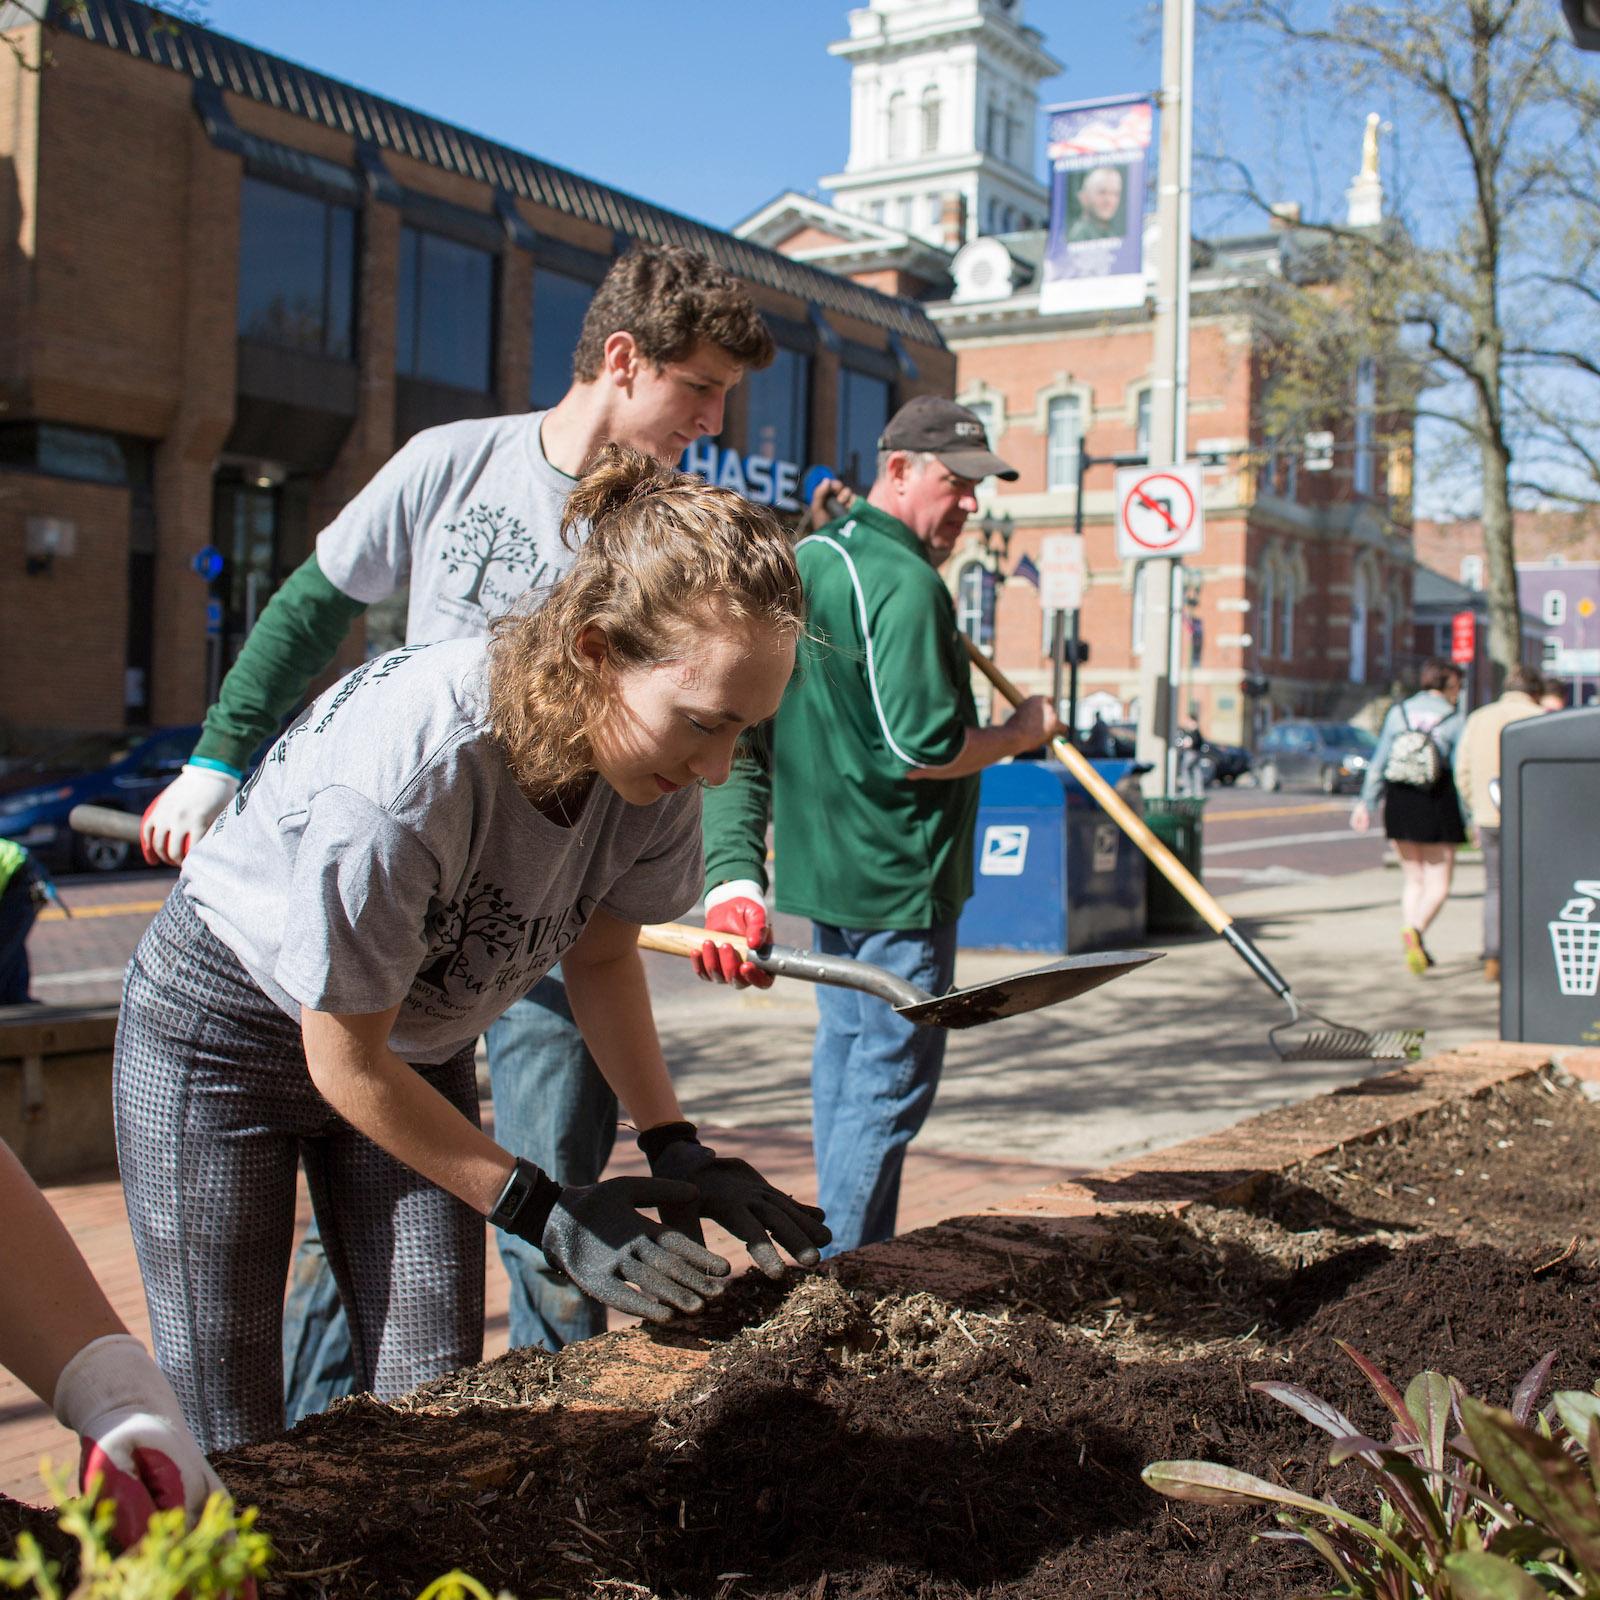 Volunteers help pull weeds and add new plants outside of the City Building